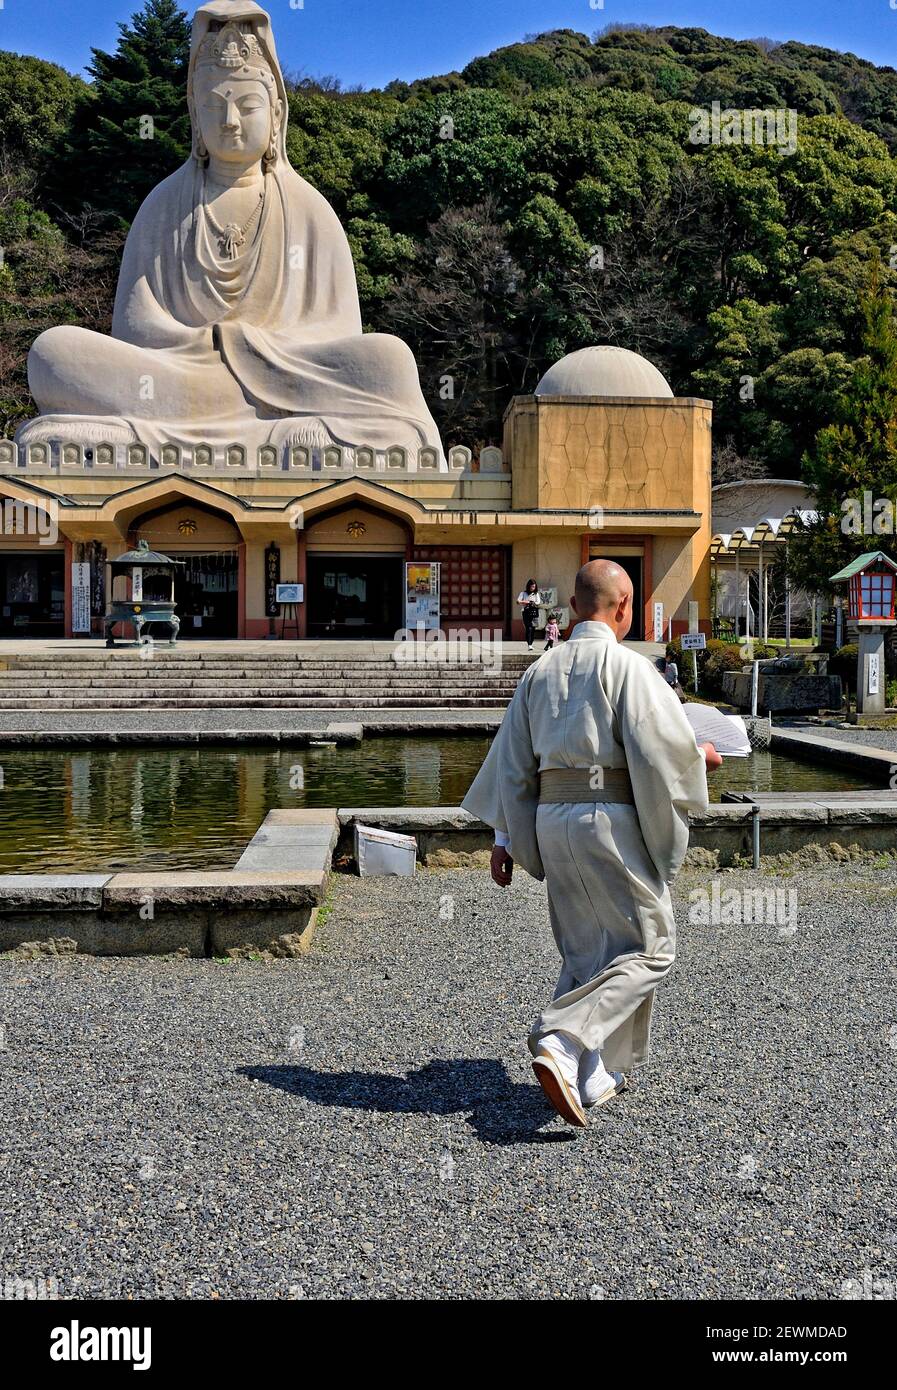 Ryozen Kannon is a war memorial commemorating the War dead of the Pacific war located in Eastern Kyoto. Statue of the Bodhisattva Avalokitesvara Stock Photo